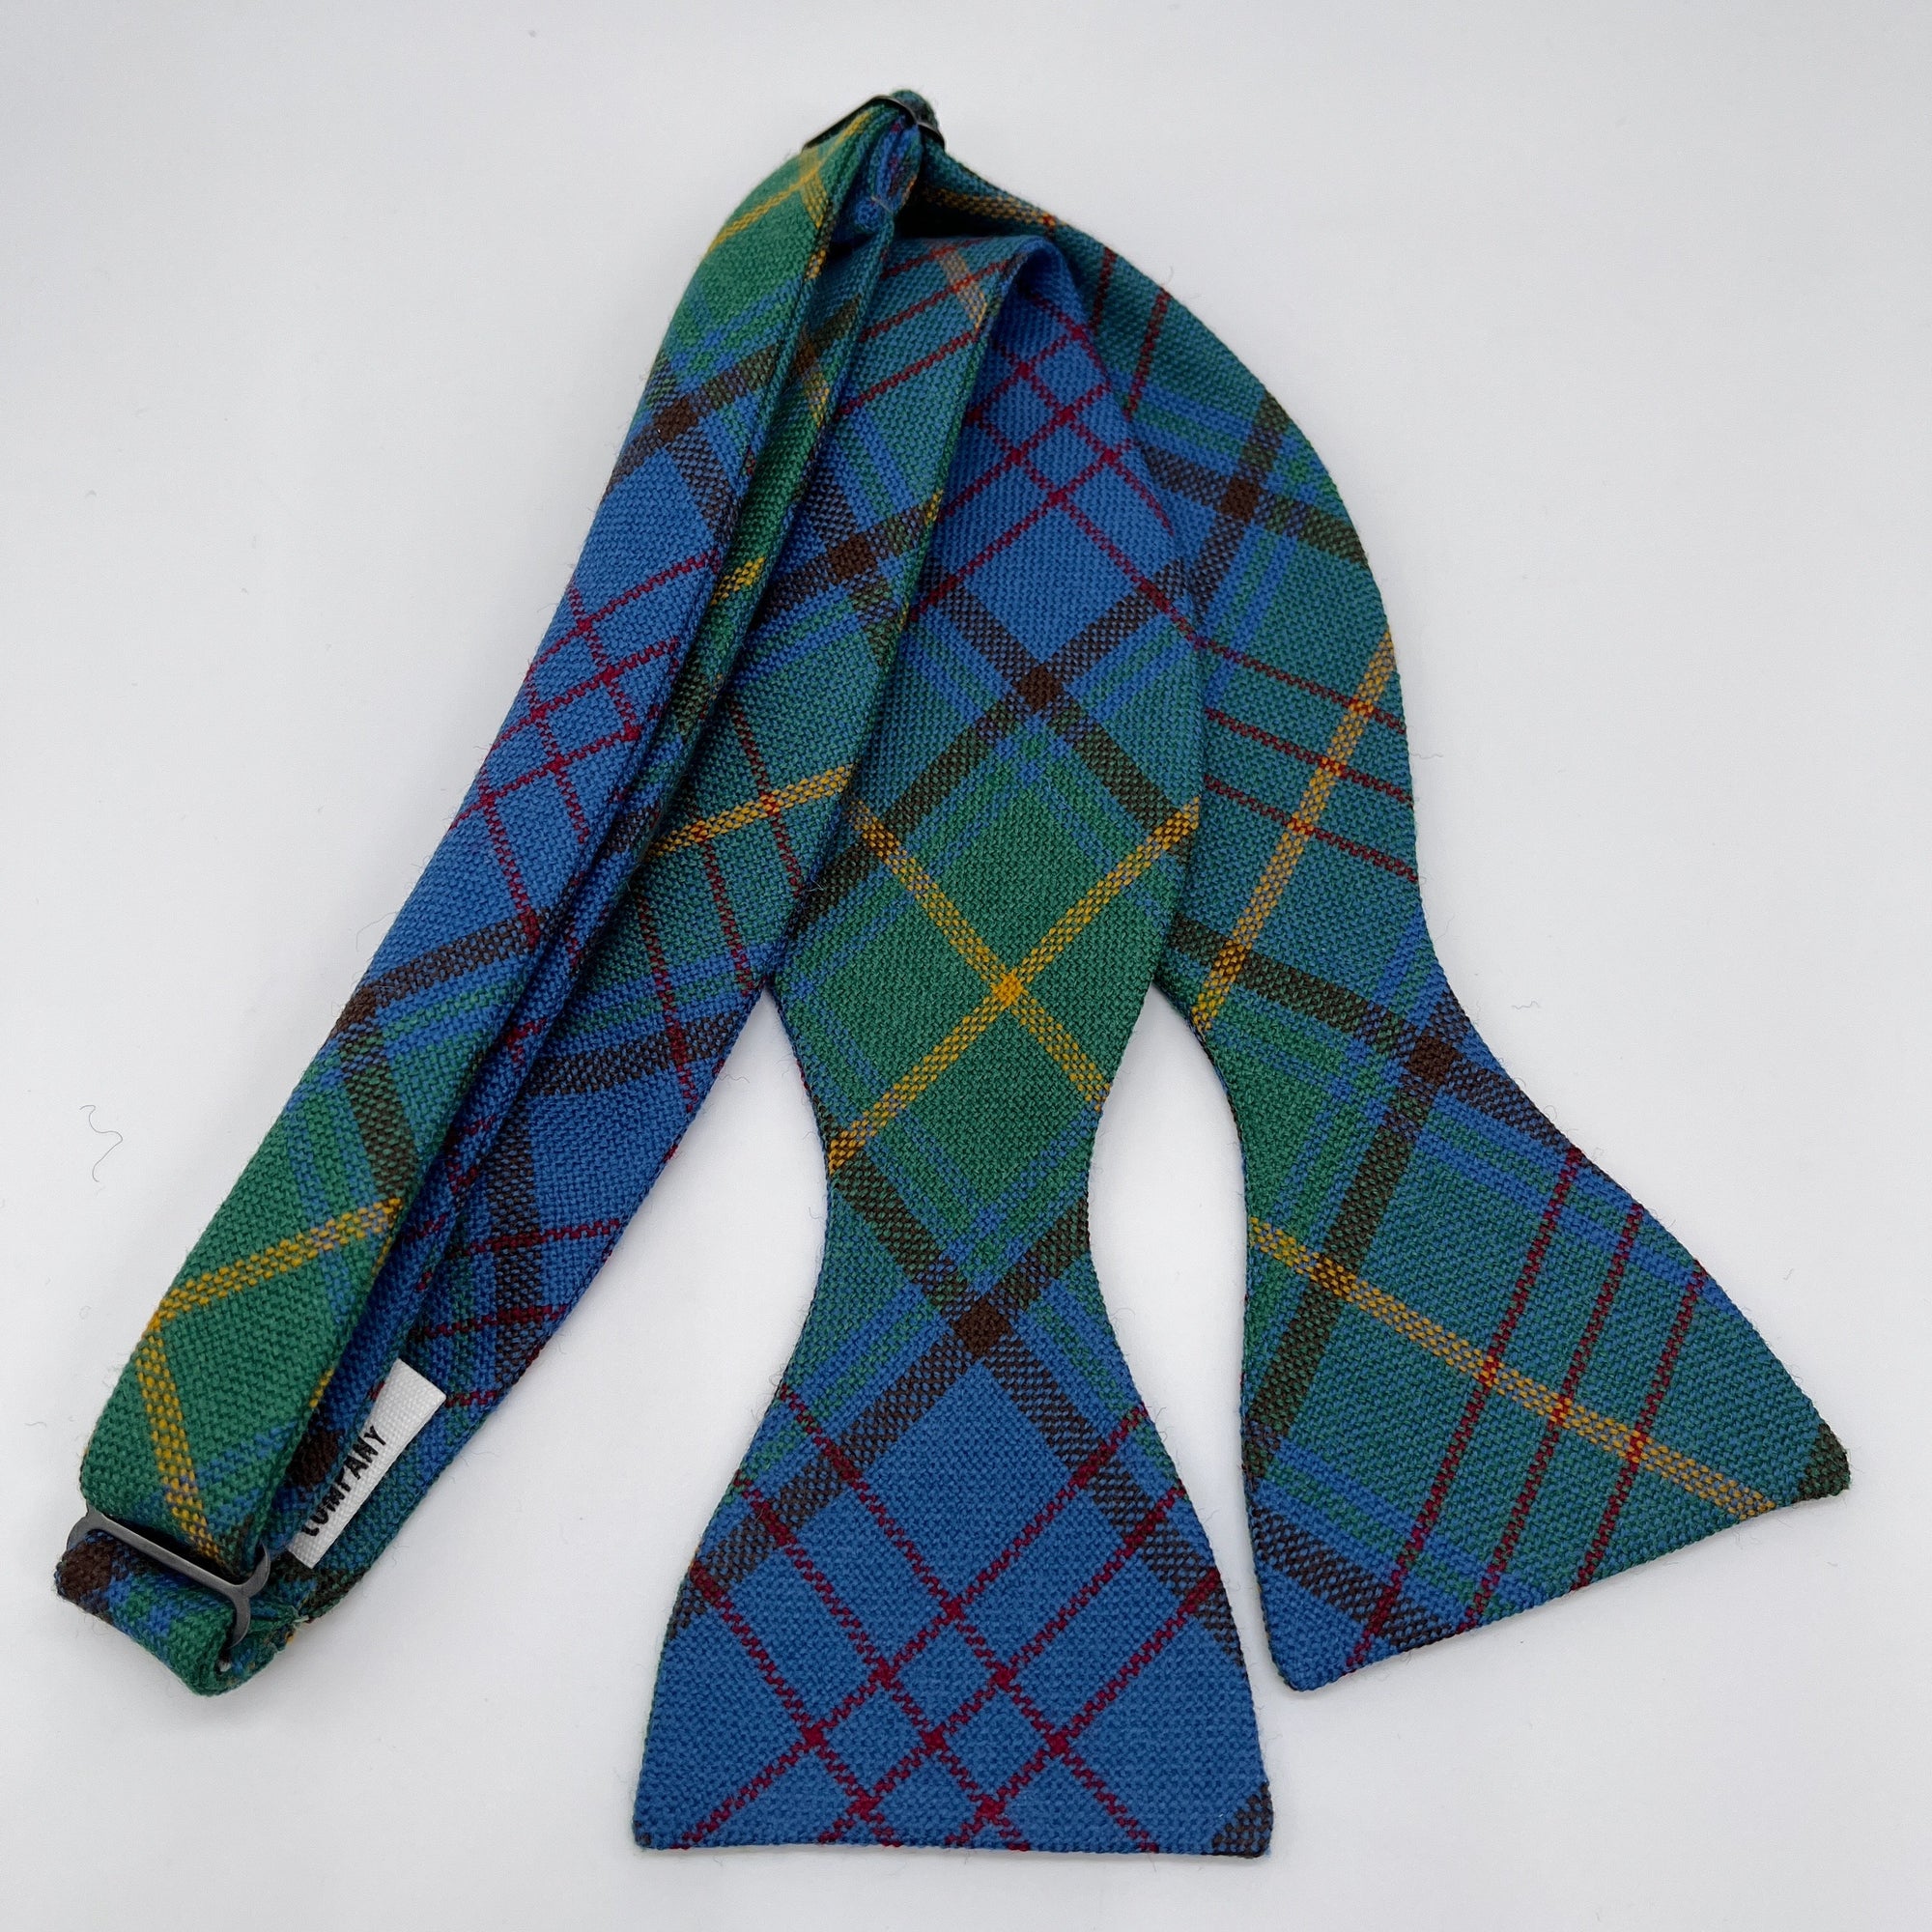 County Donegal Tartan Self-Tie by the Belfast Bow Company